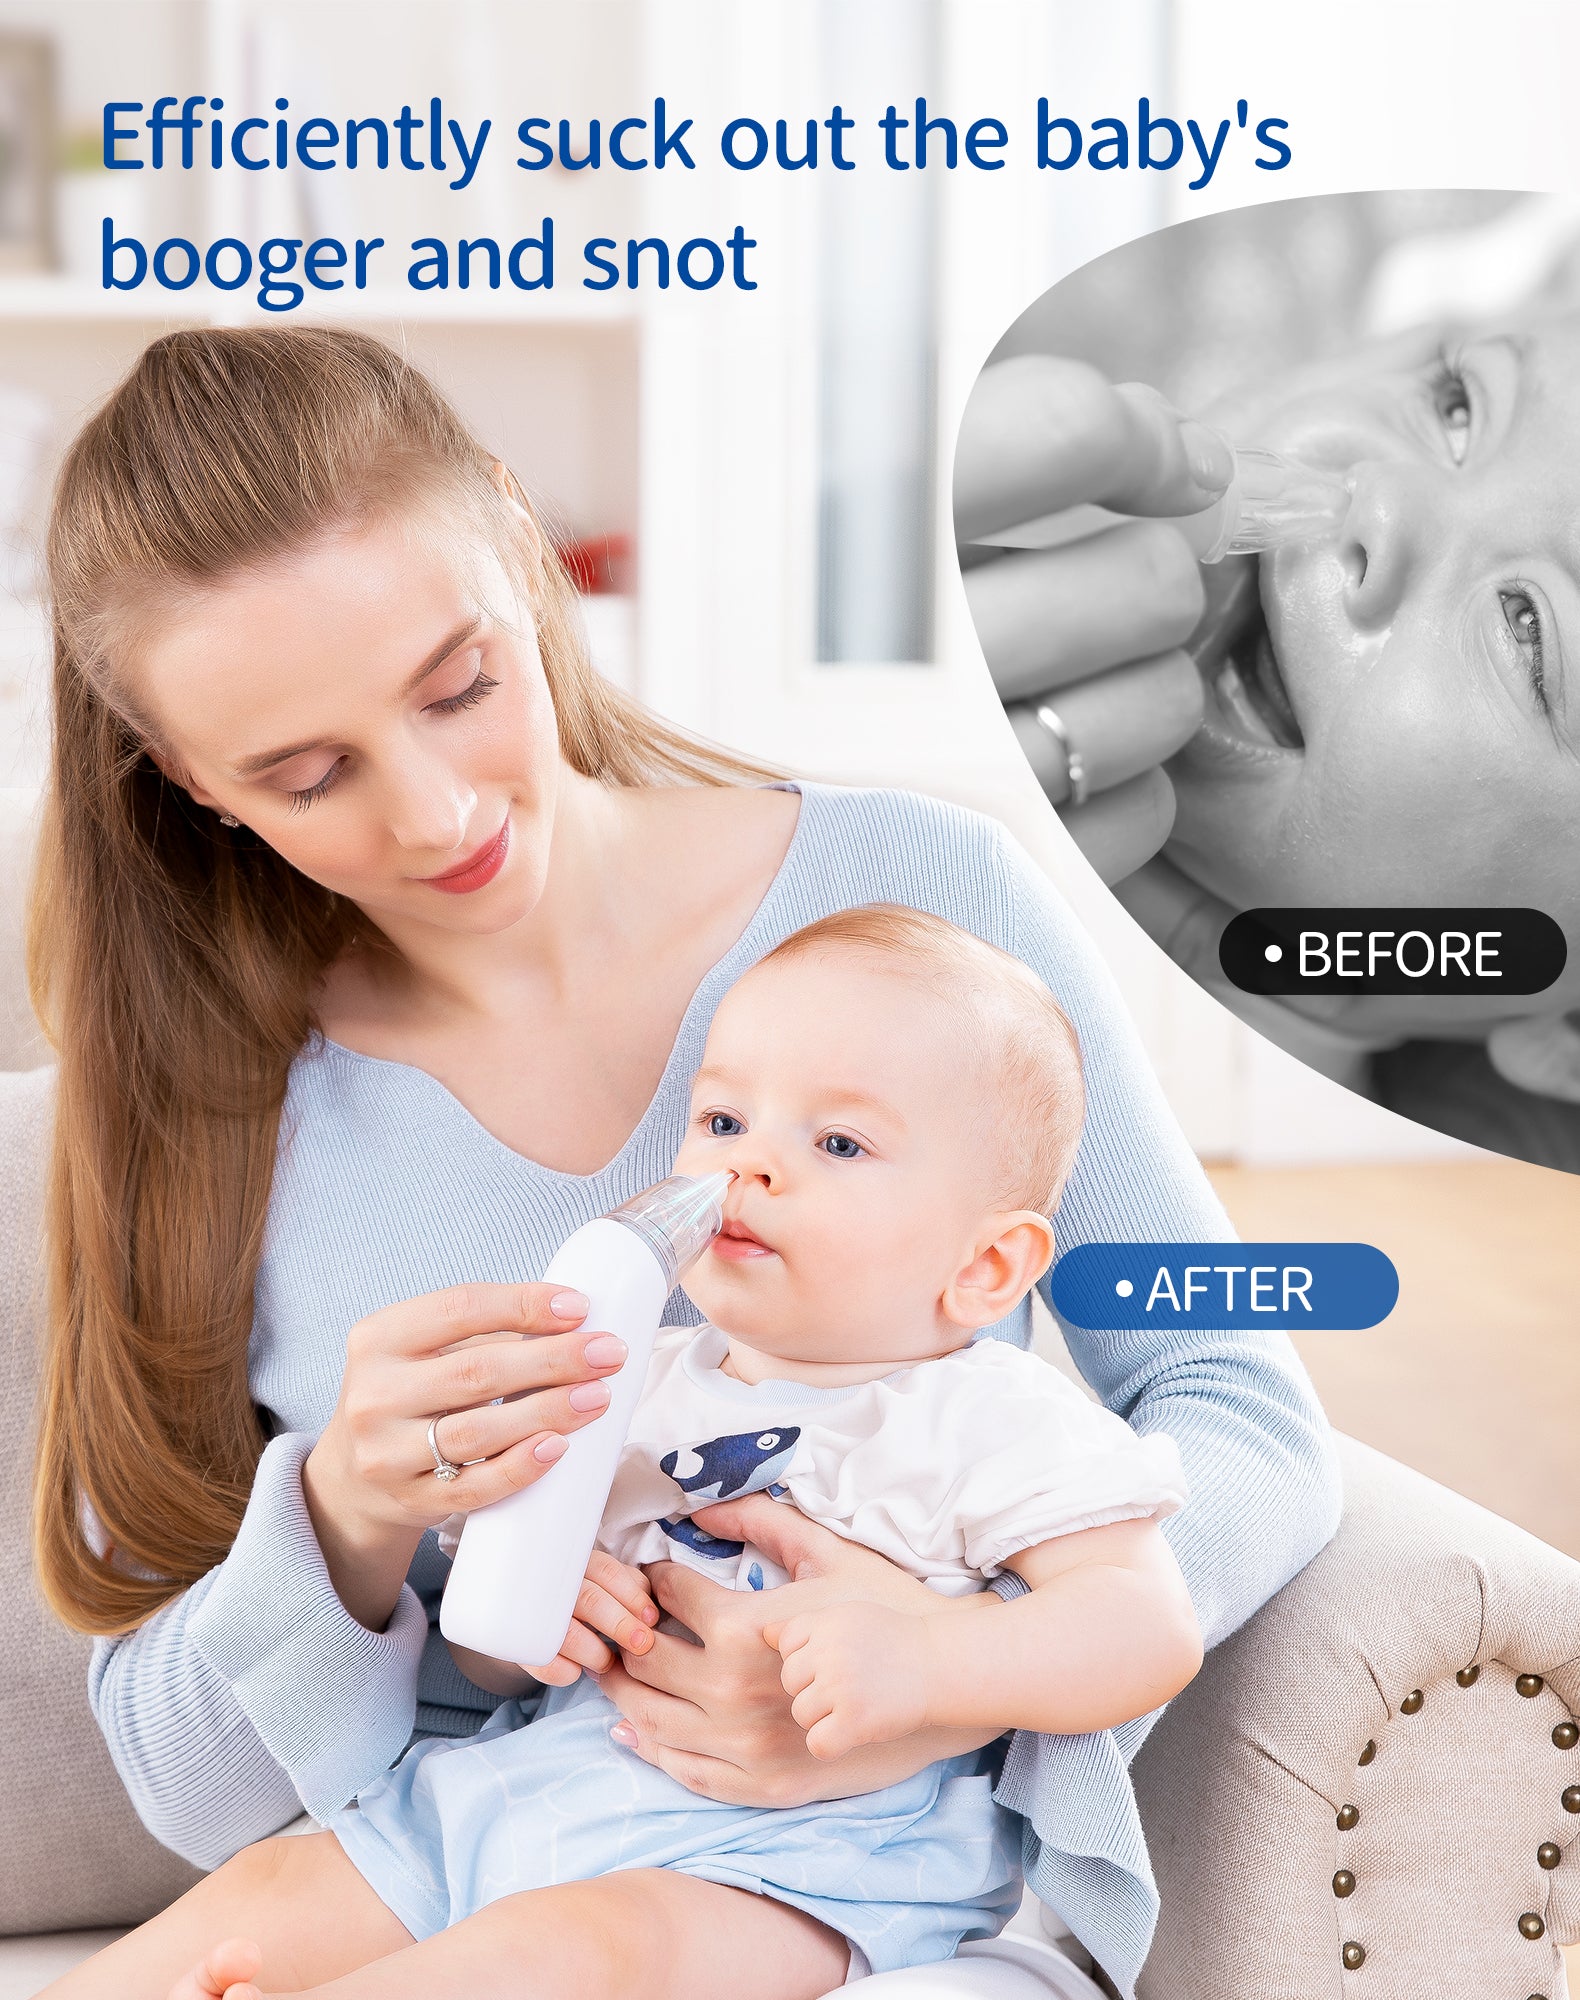 Nasal Aspirator for Baby, Electric Nose Booger Sucker Automatic Nose  Cleaner USB Rechargeable W/ 3 Silicone Tips, 5 Suctions Power, Music &  Colorful